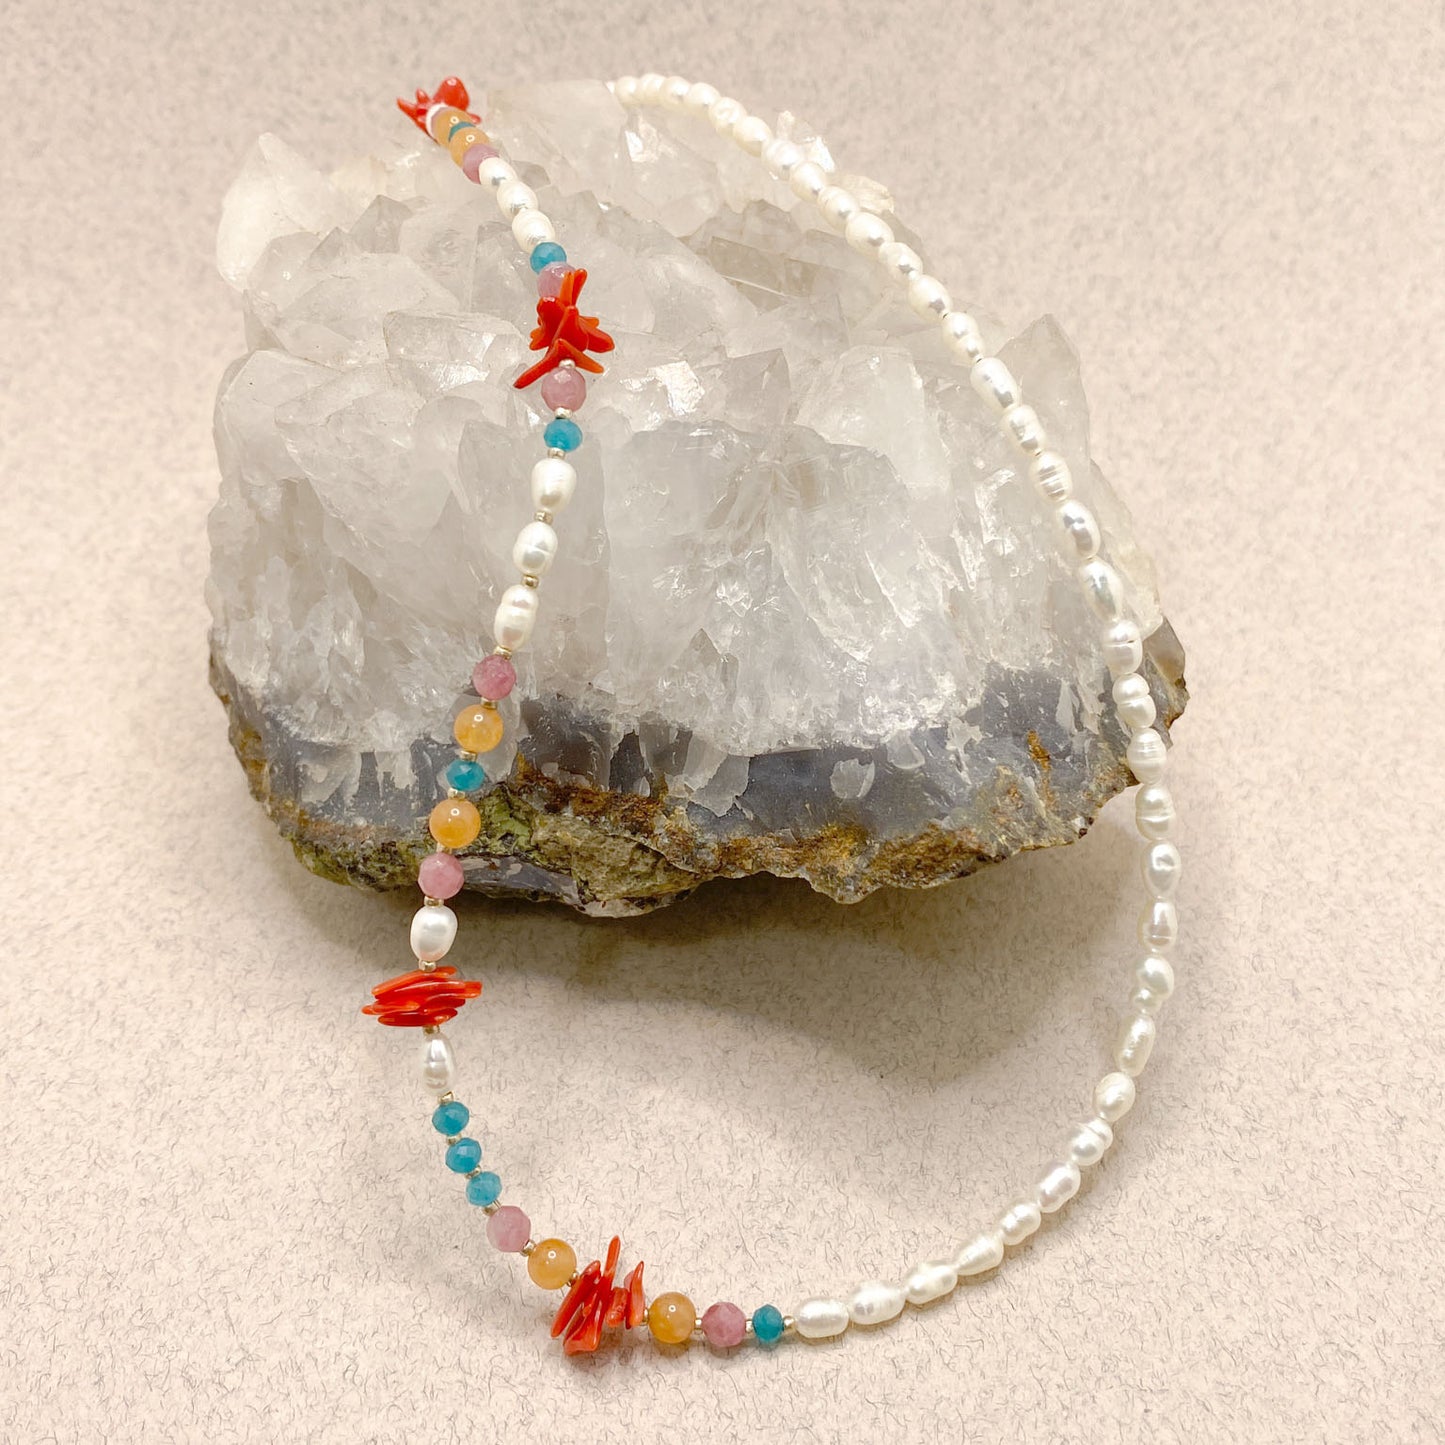 Beaded Pearl Coral and Gemstone Necklace